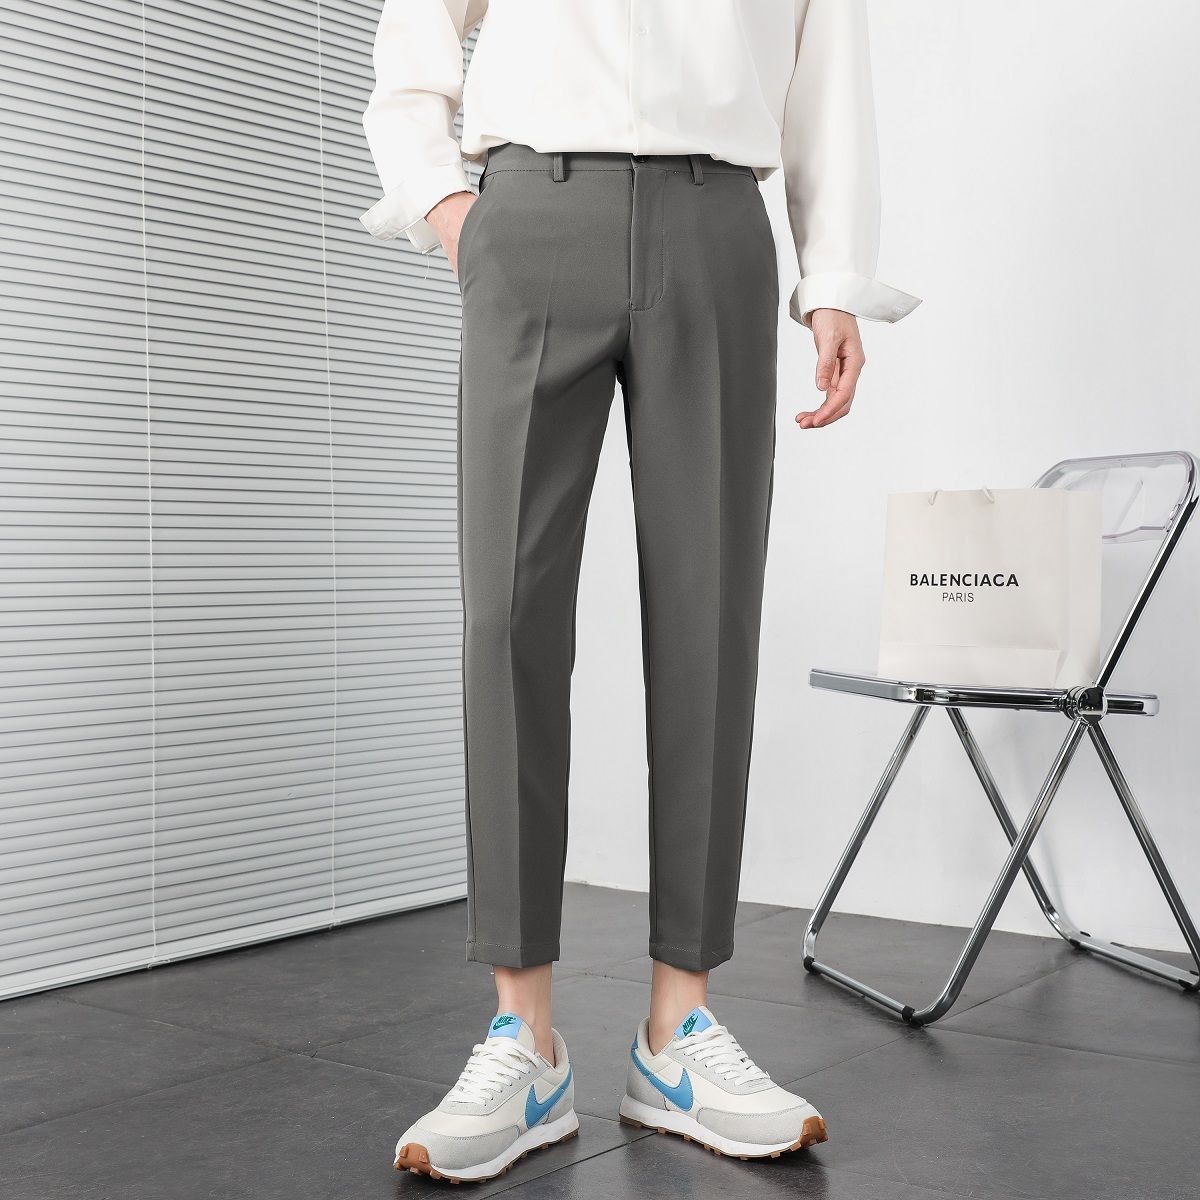 Spring and autumn drape trousers Korean style trendy slim feet casual nine-point trousers men's light familiar straight suit trousers